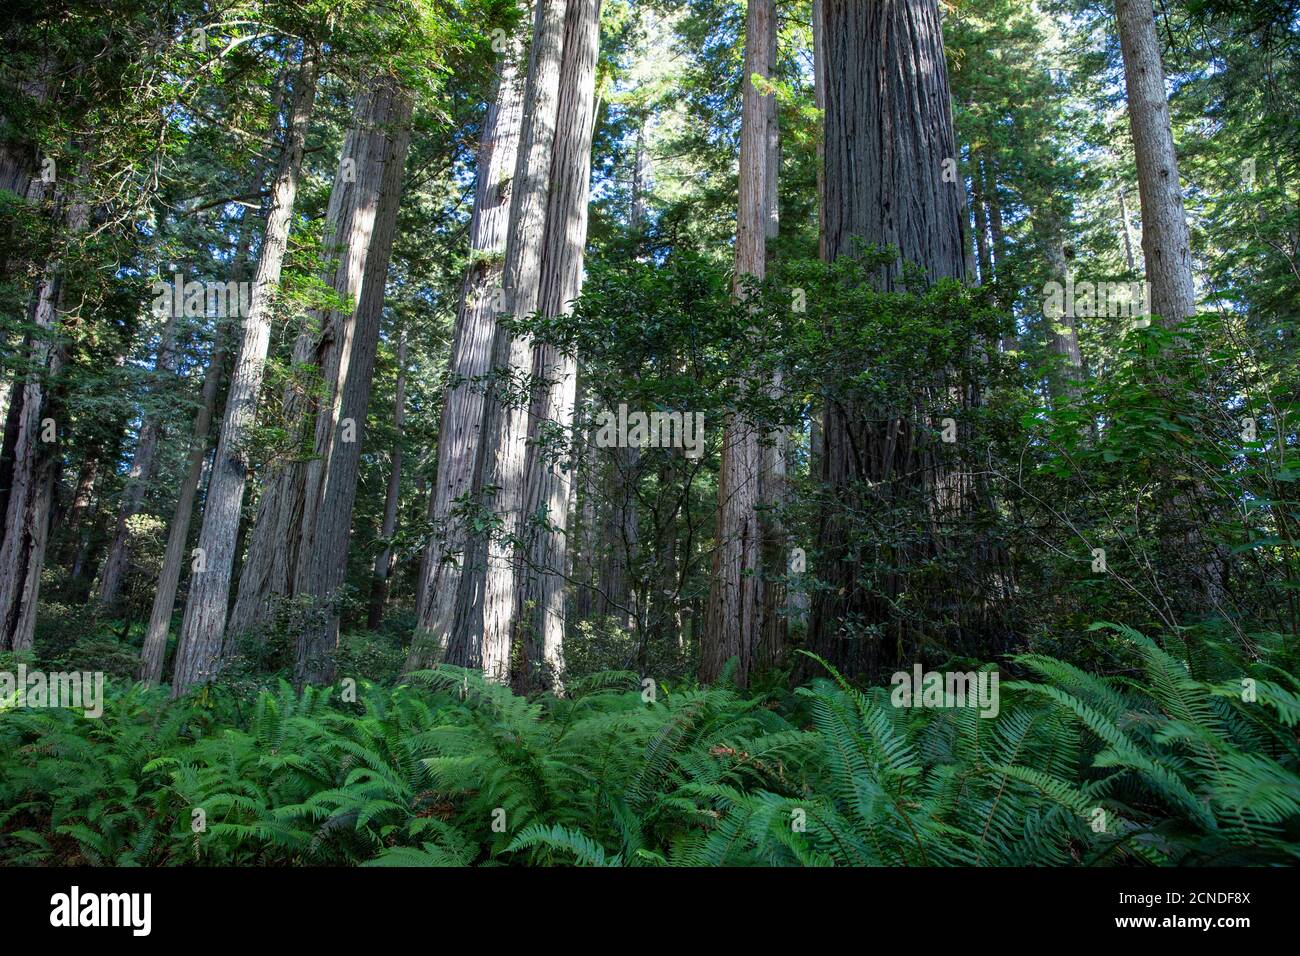 Giant redwood trees on the Trillium Trail, Redwood National and State Parks,  California, United States of America Stock Photo